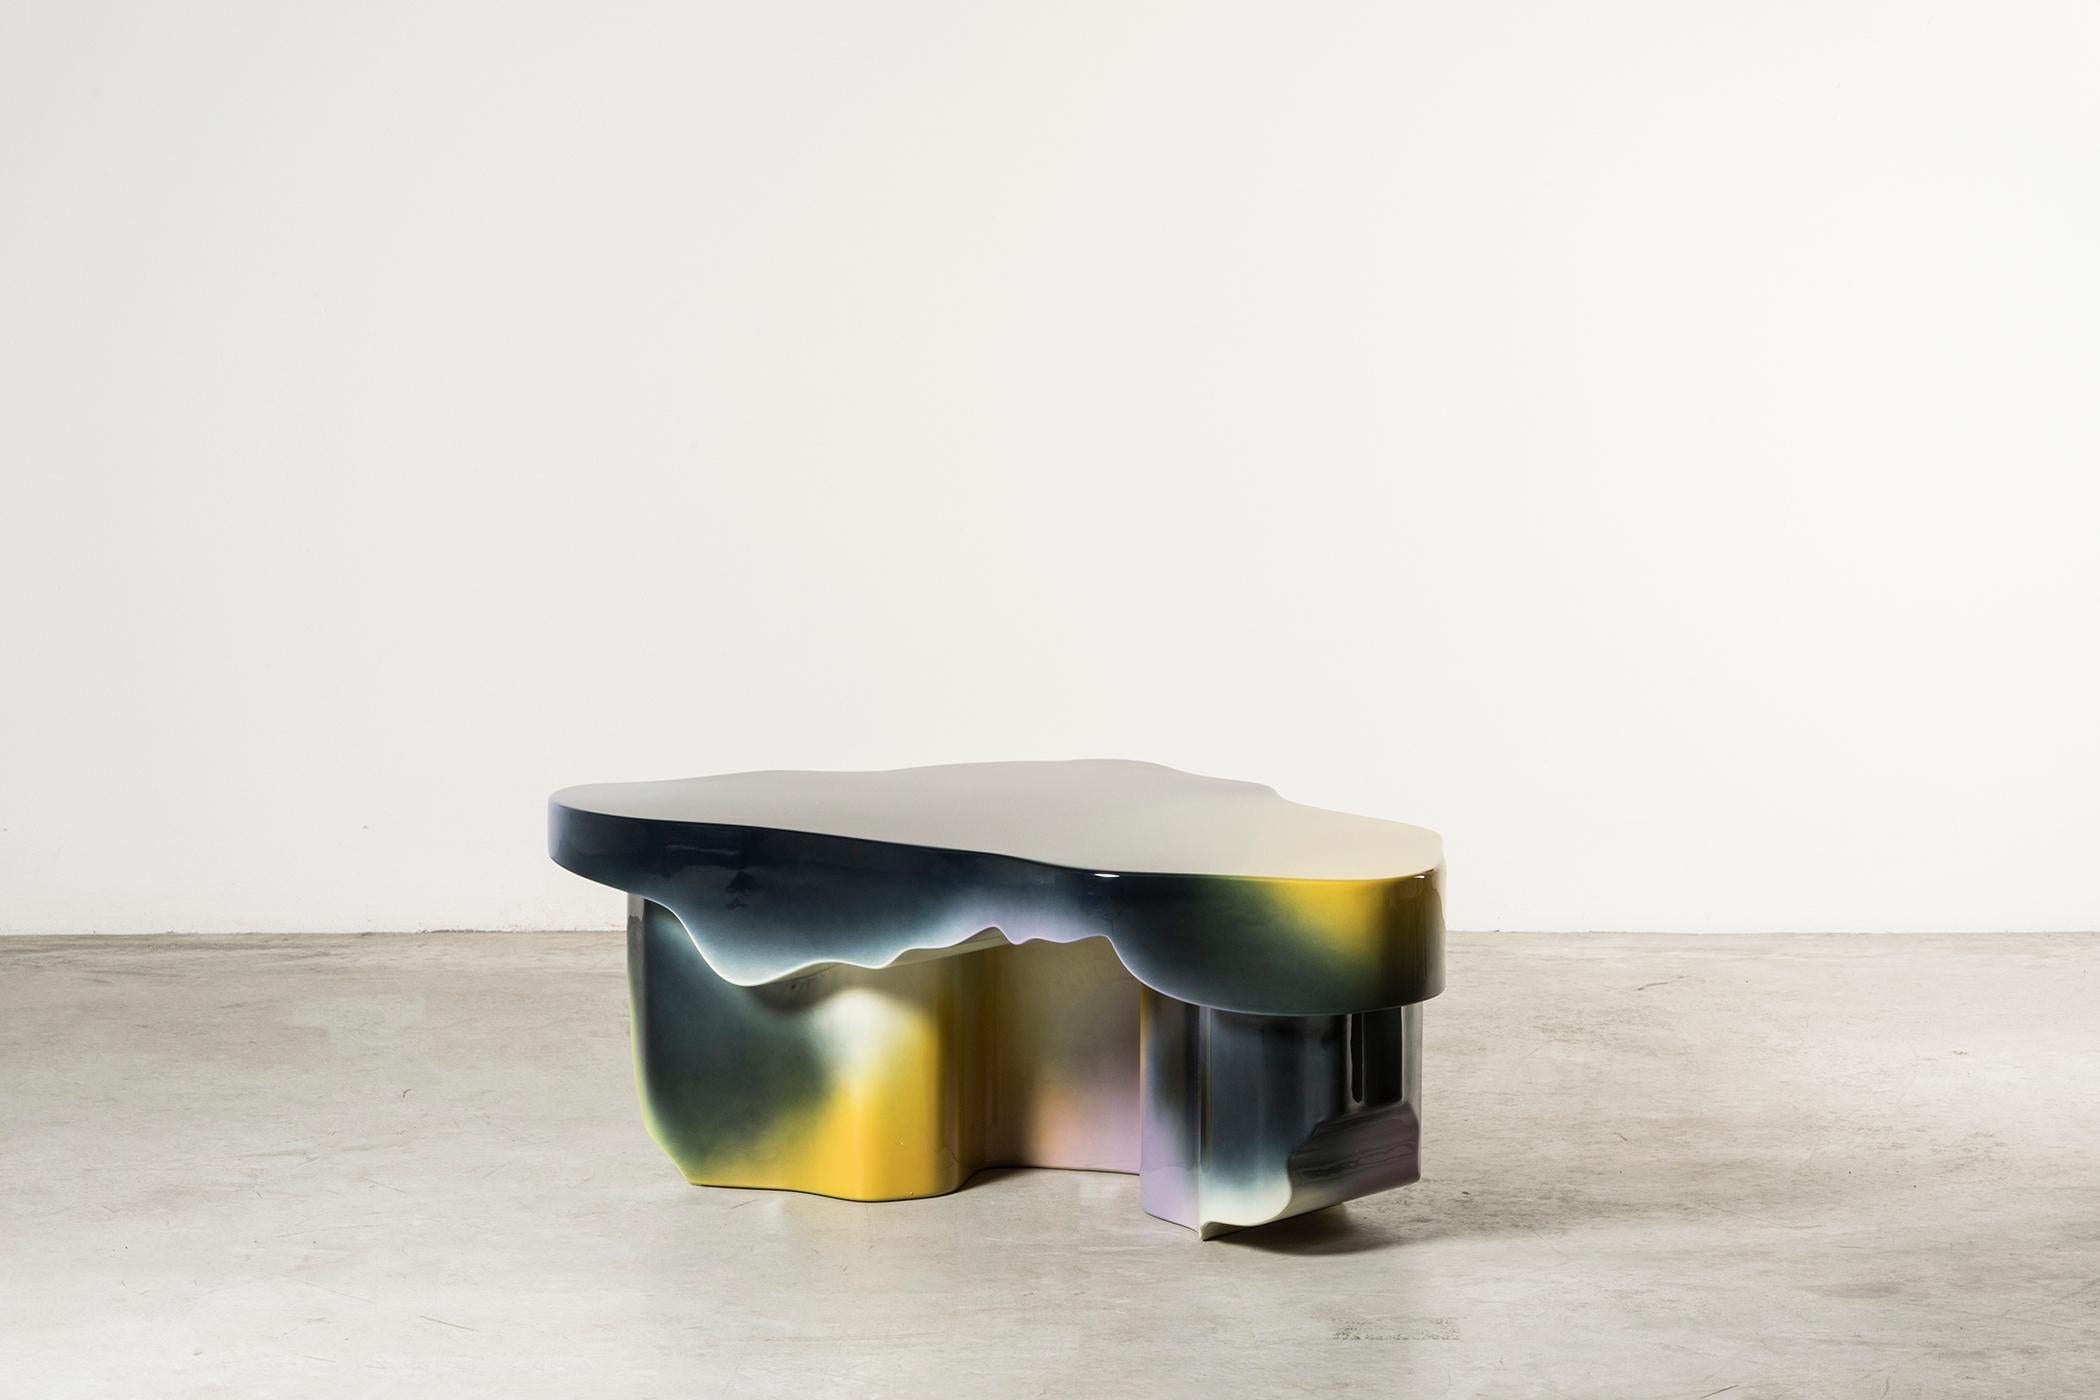 Guise coffee table by Odd Matter, the Netherlands, 2019. Nilufar edition. EPS foam, spray. Measures: 45 x 80 x H 123 cm, 17.7 x 31 x H 48.4 in. Guise explores the first encounter? Through the potential of spray painting.? Surfaces protect what is